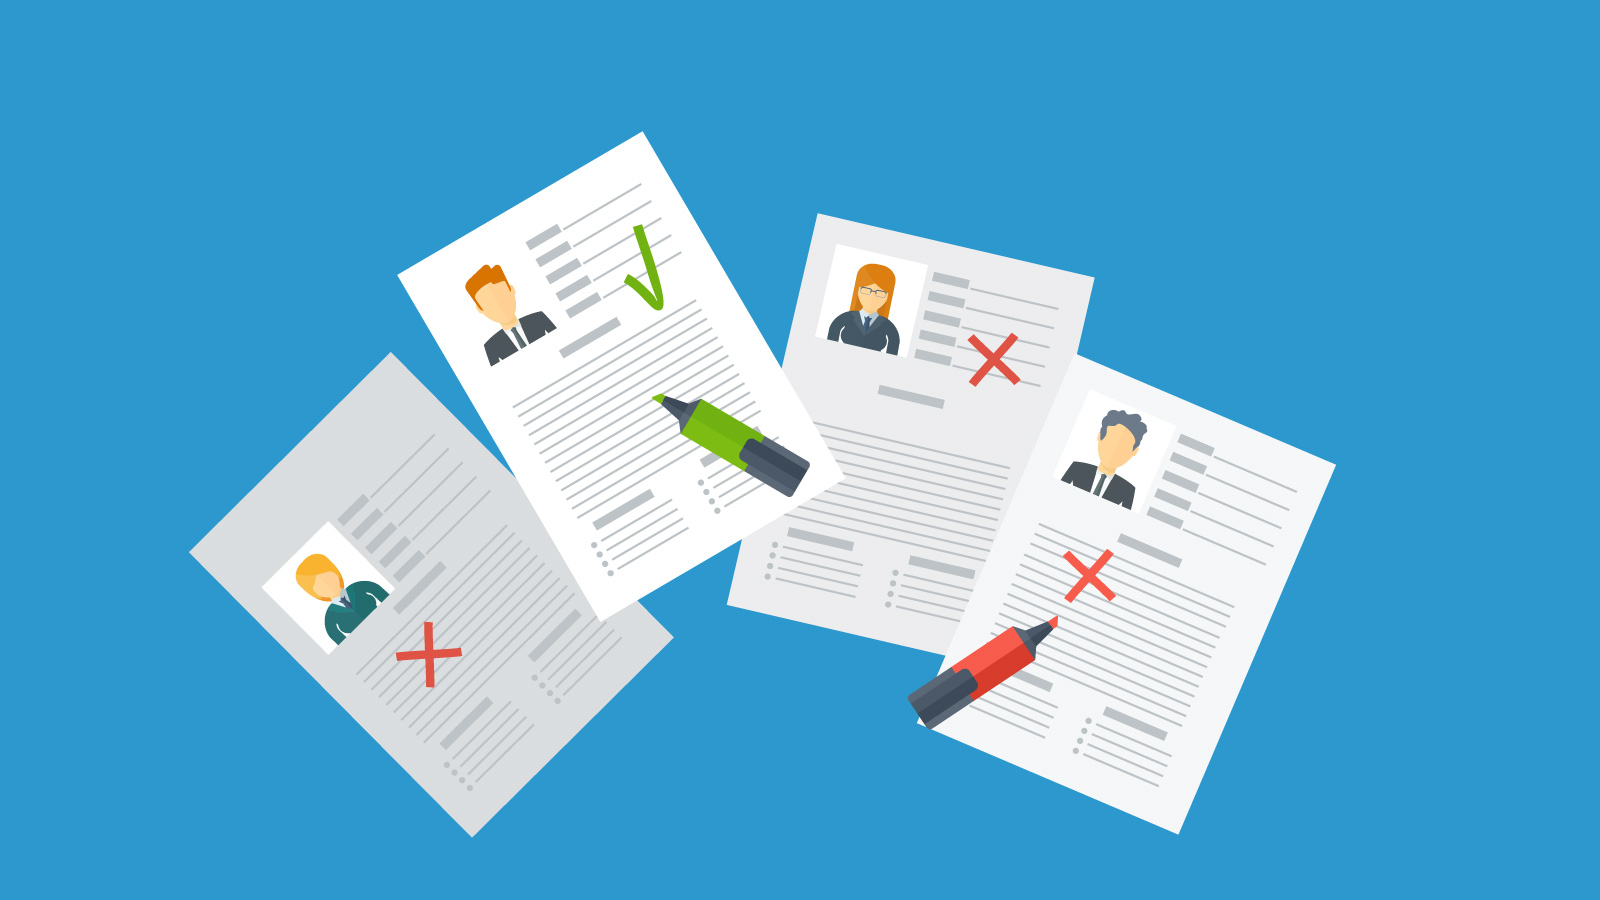 Top 7 Mistakes to avoid when writing resume